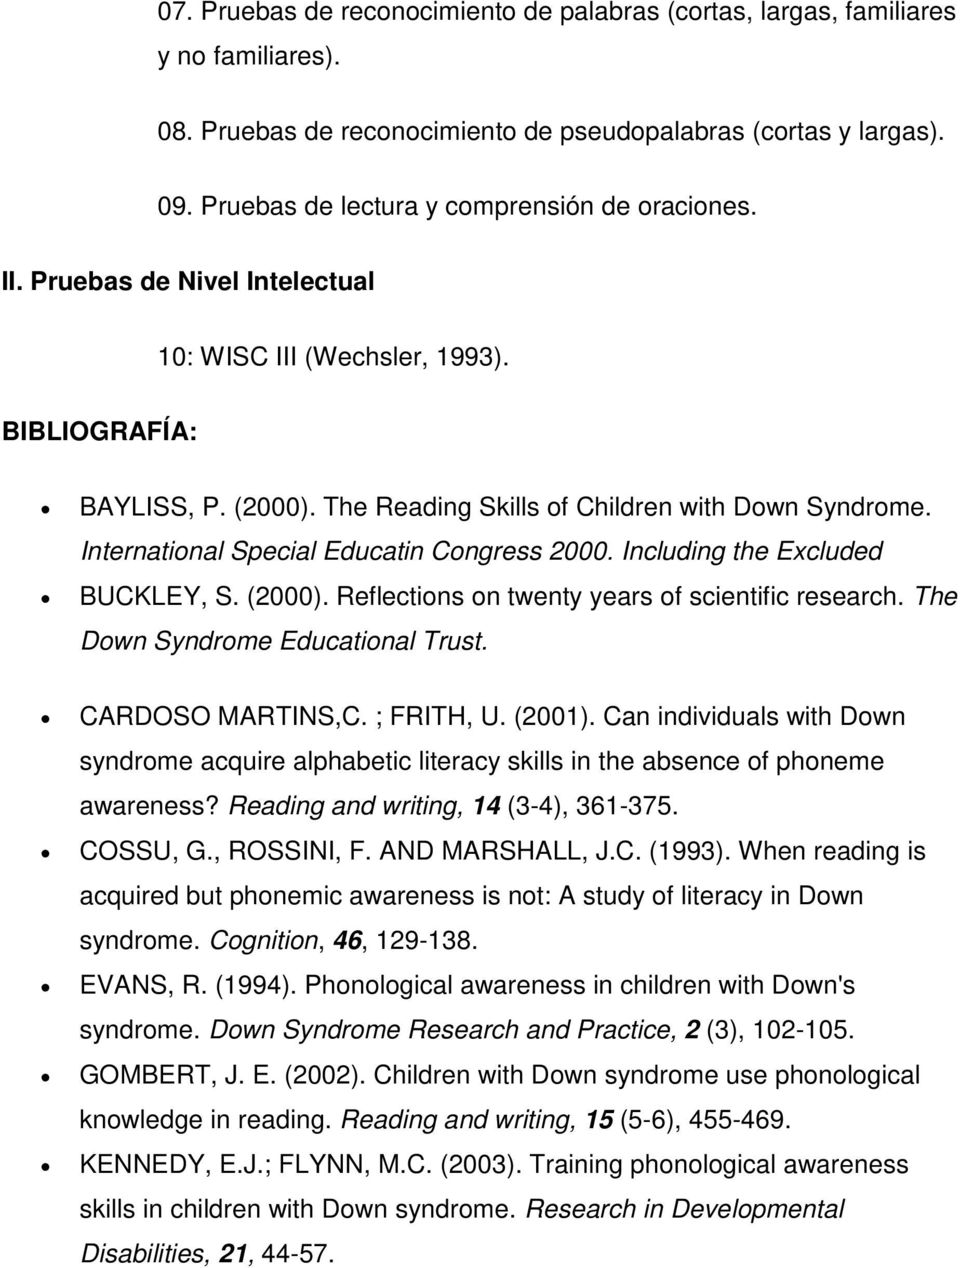 International Special Educatin Congress 2000. Including the Excluded BUCKLEY, S. (2000). Reflections on twenty years of scientific research. The Down Syndrome Educational Trust. CARDOSO MARTINS,C.